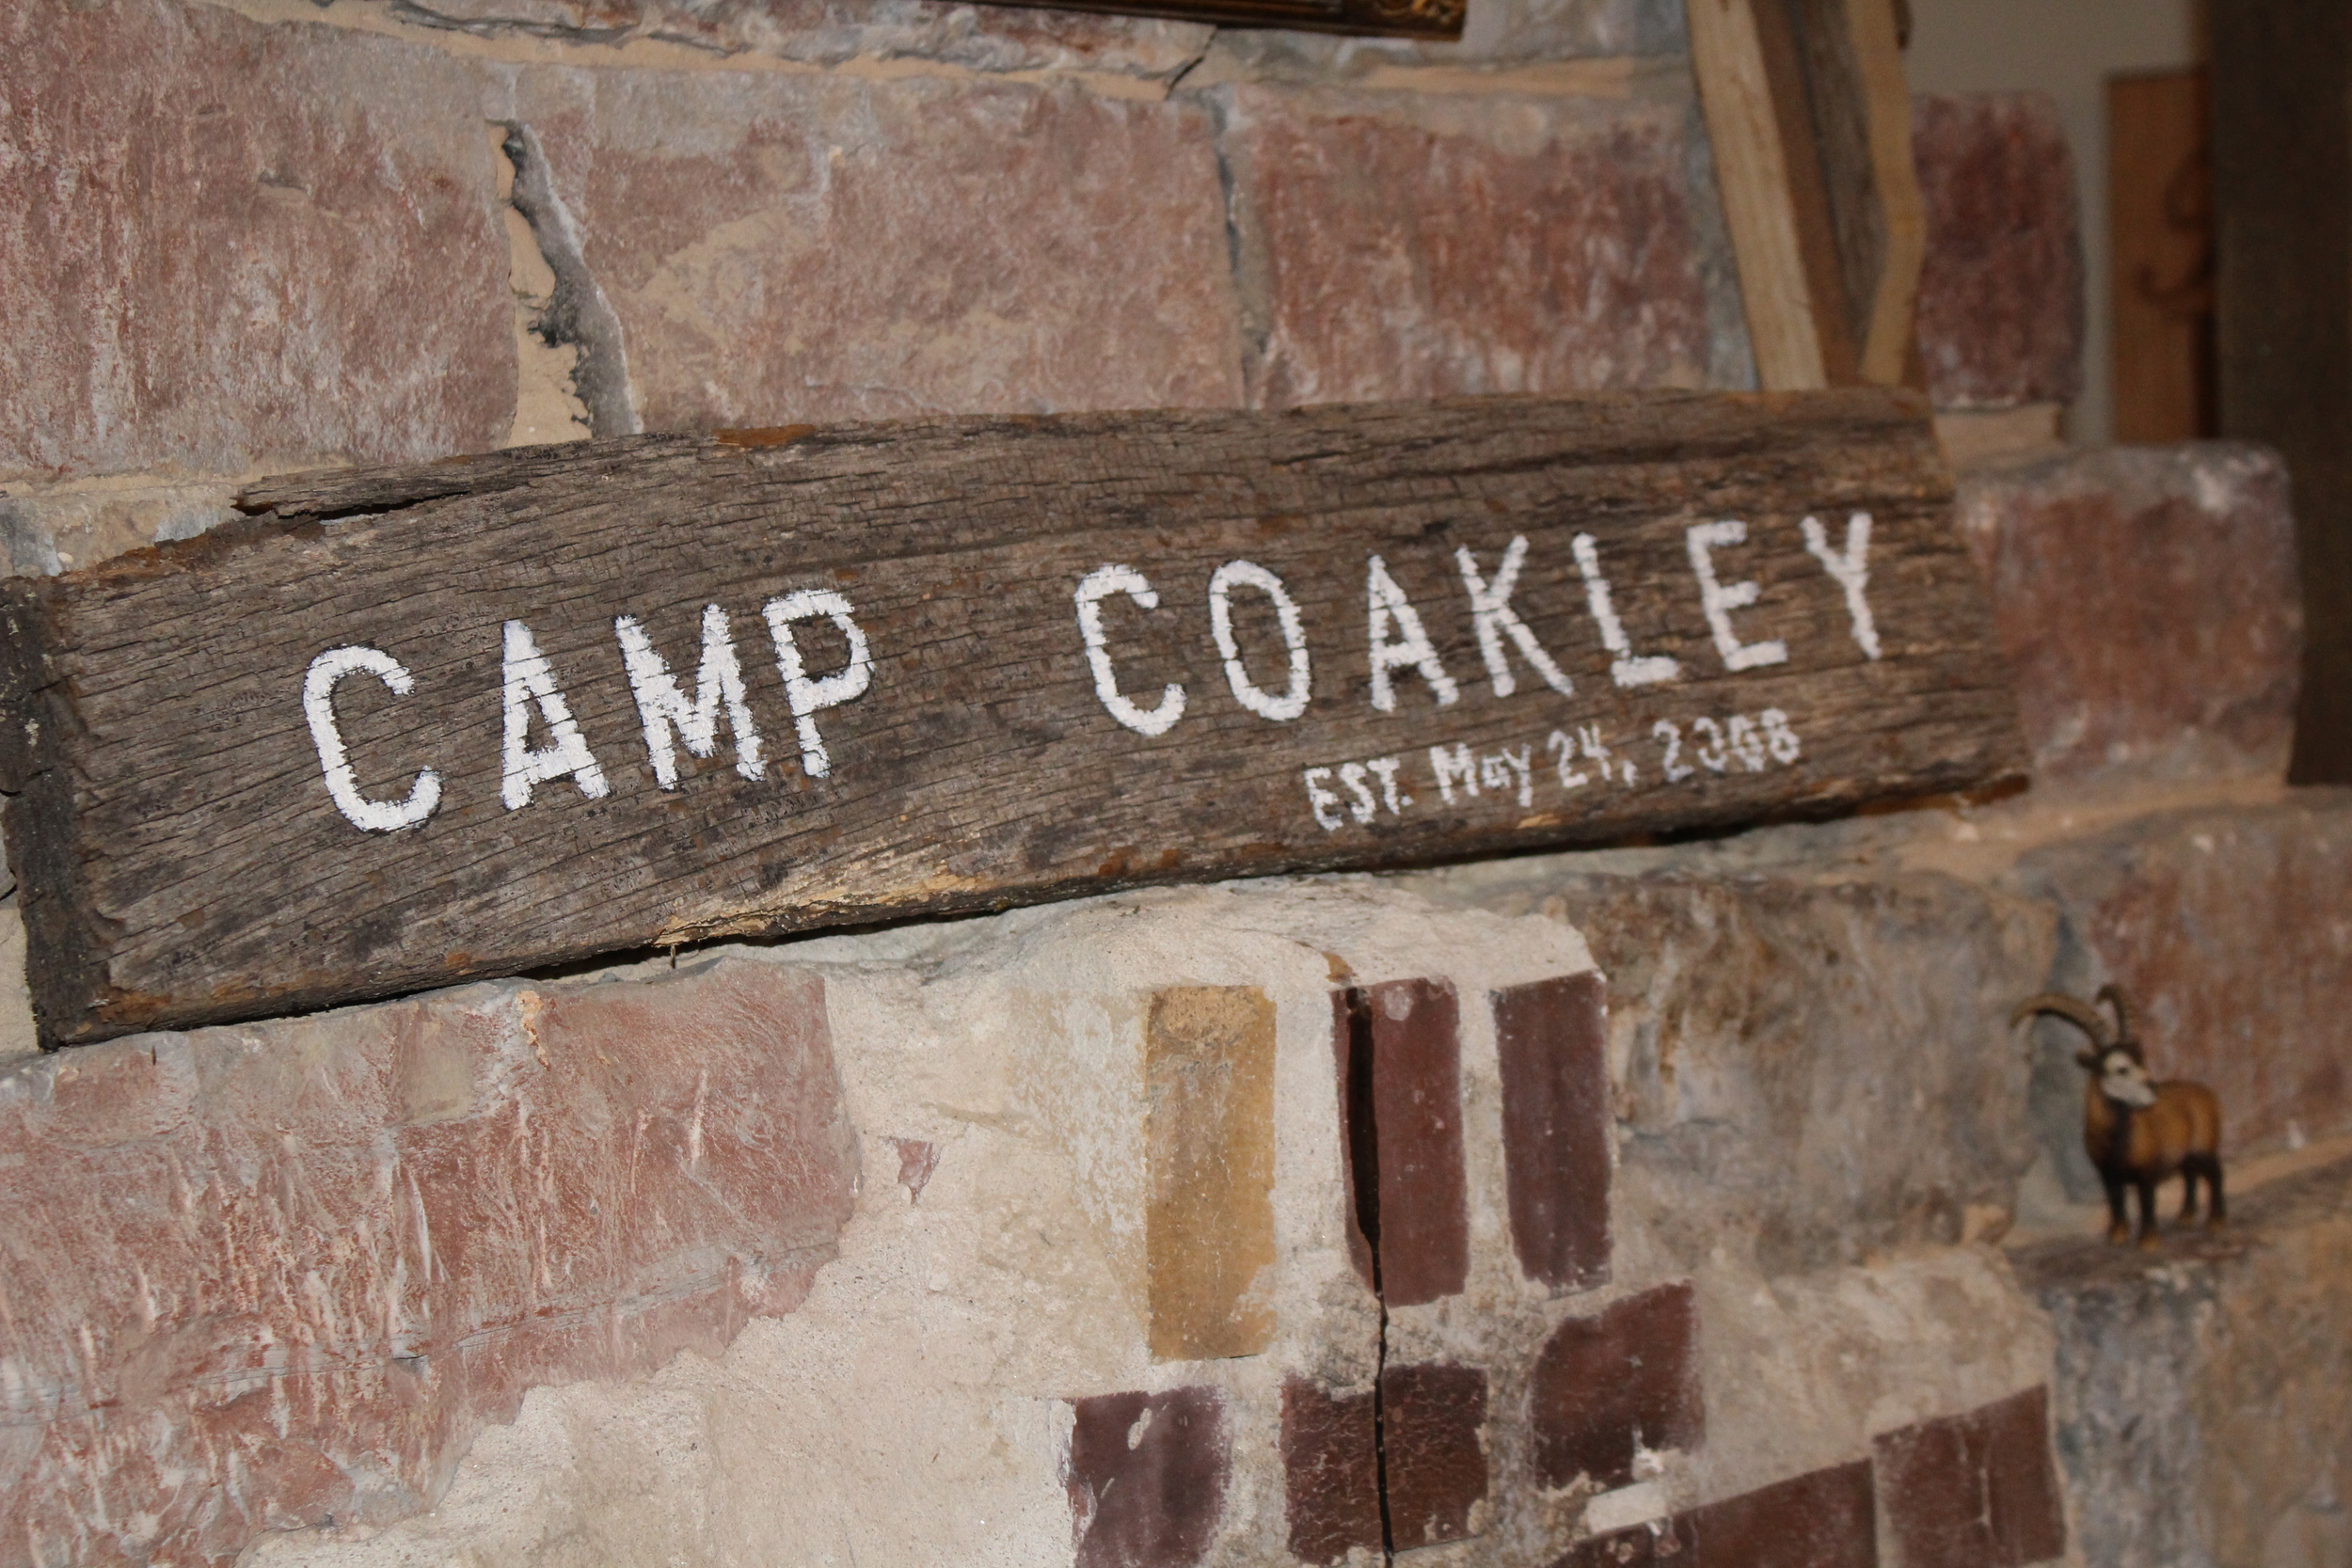 Camp Coakley sign (wedding) displayed over fireplace